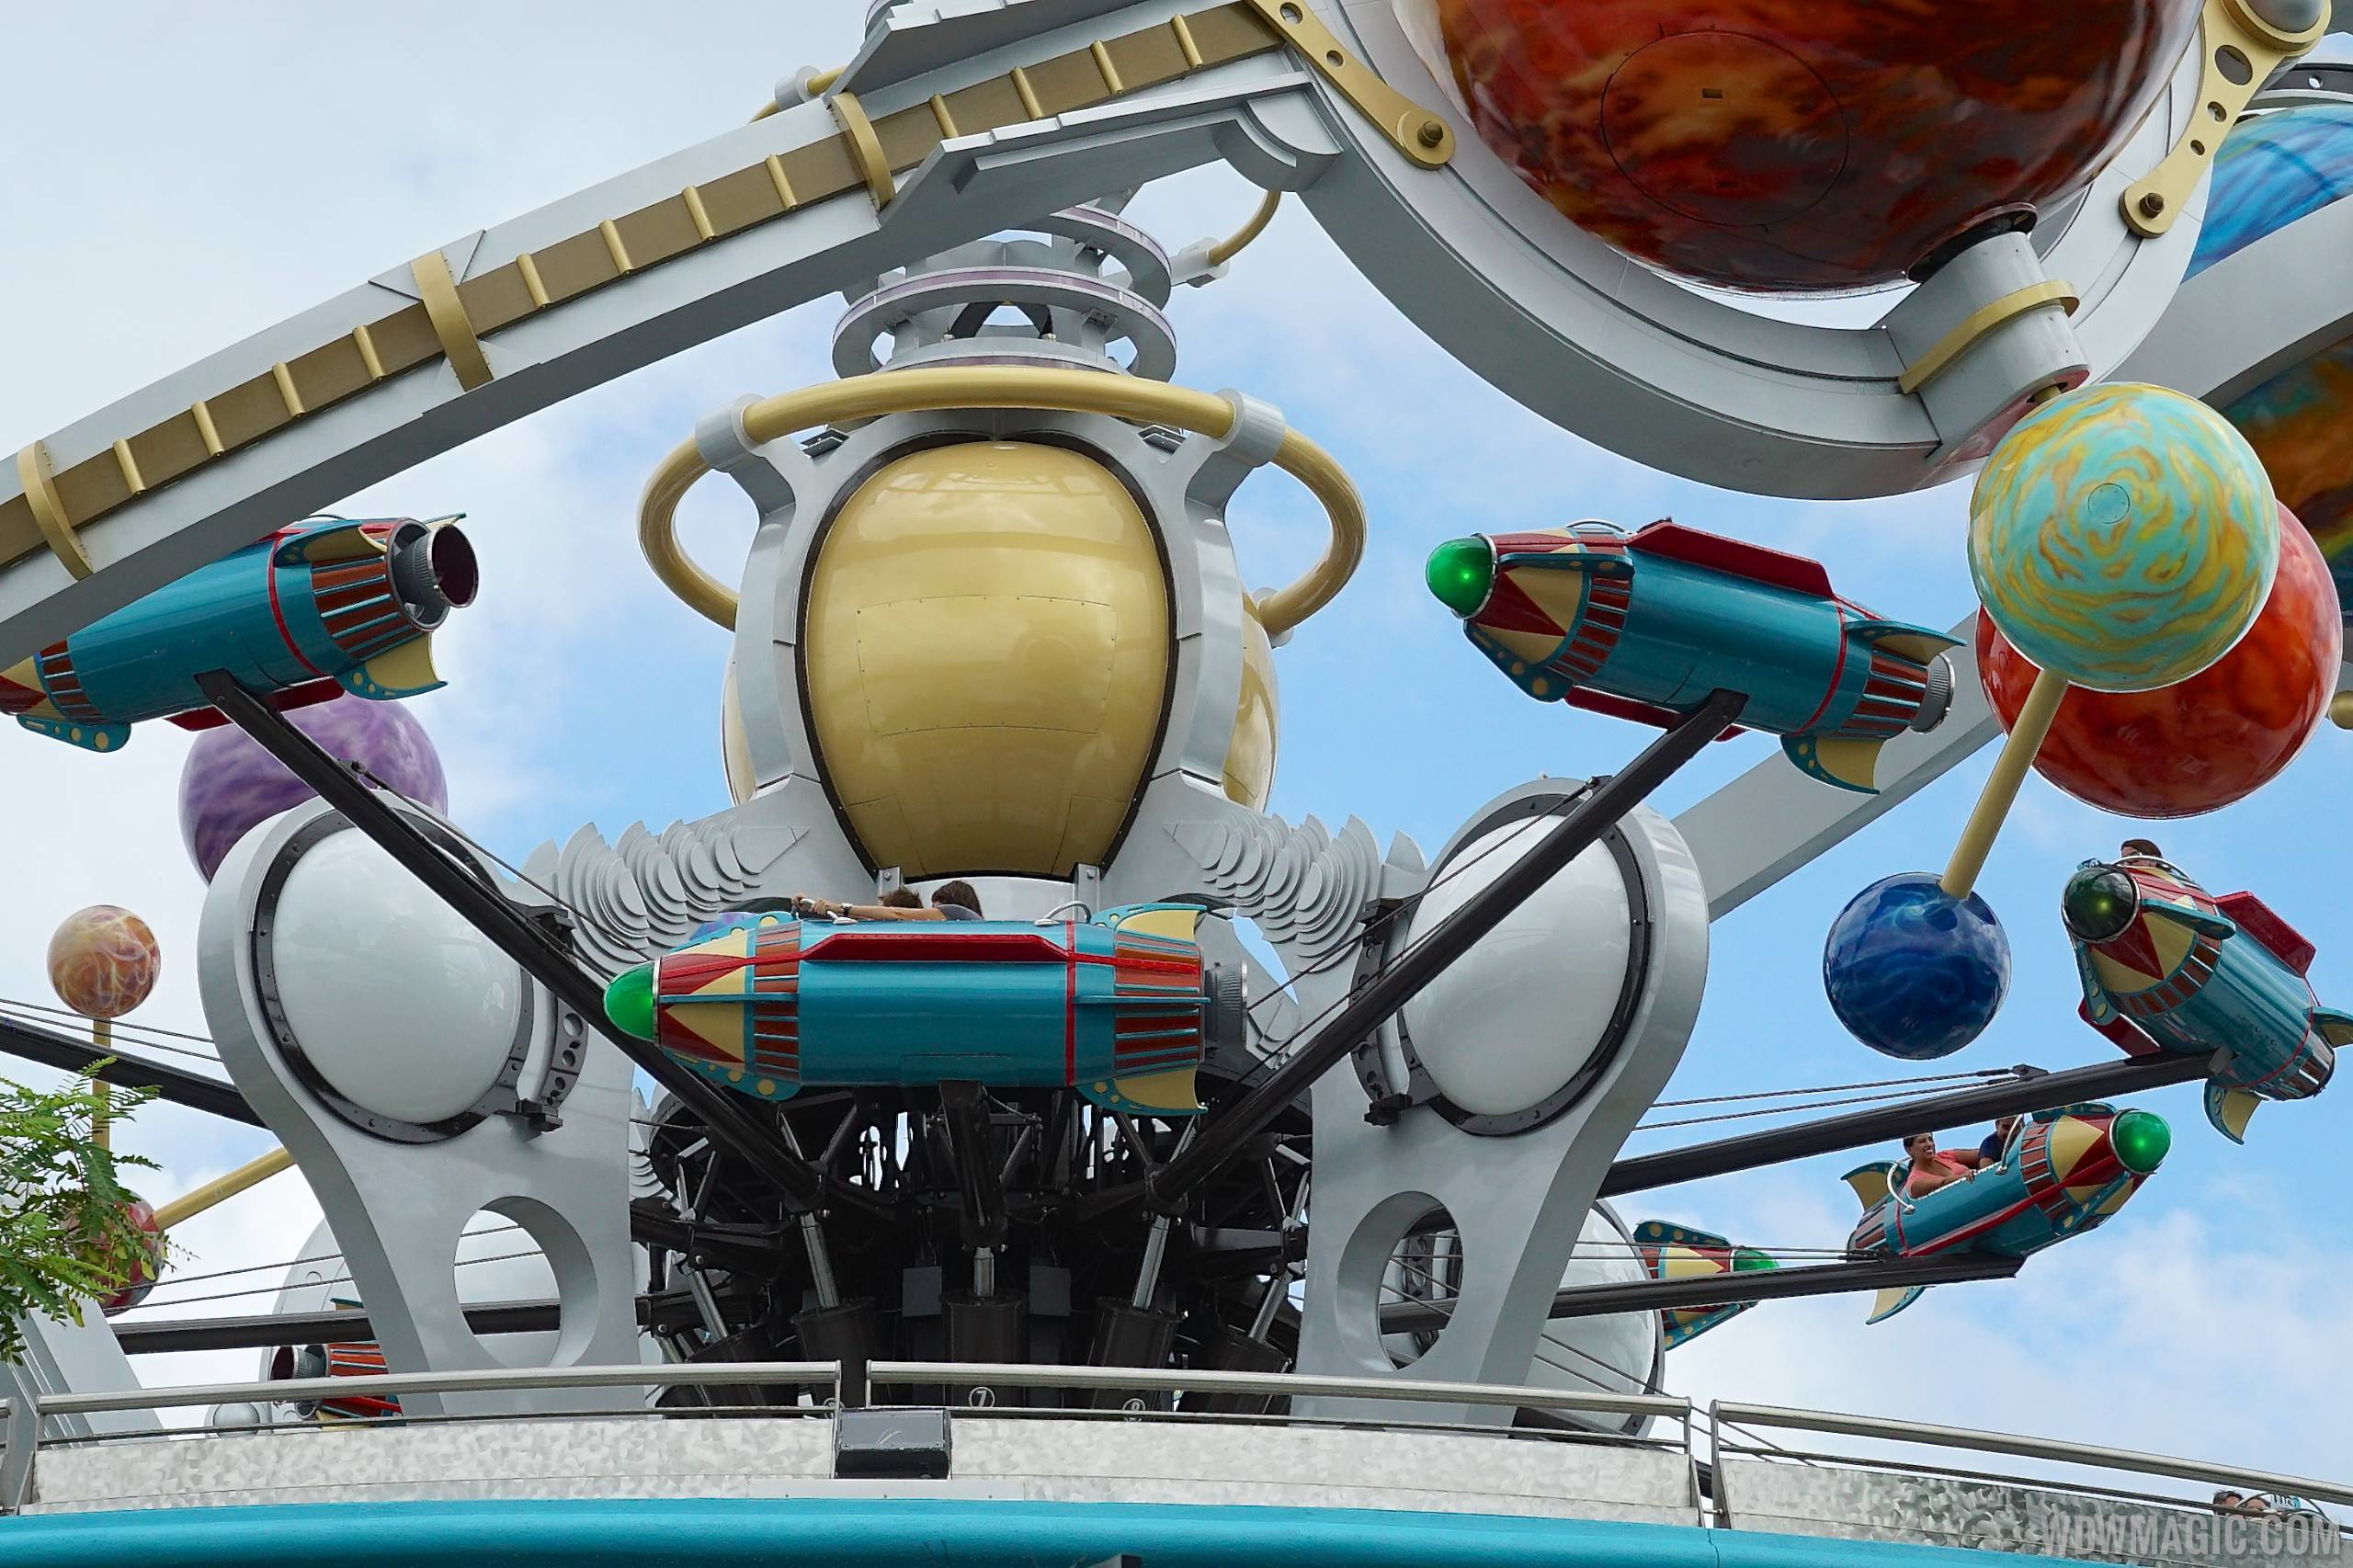 PHOTOS - Astro Orbiter reopens with new color scheme